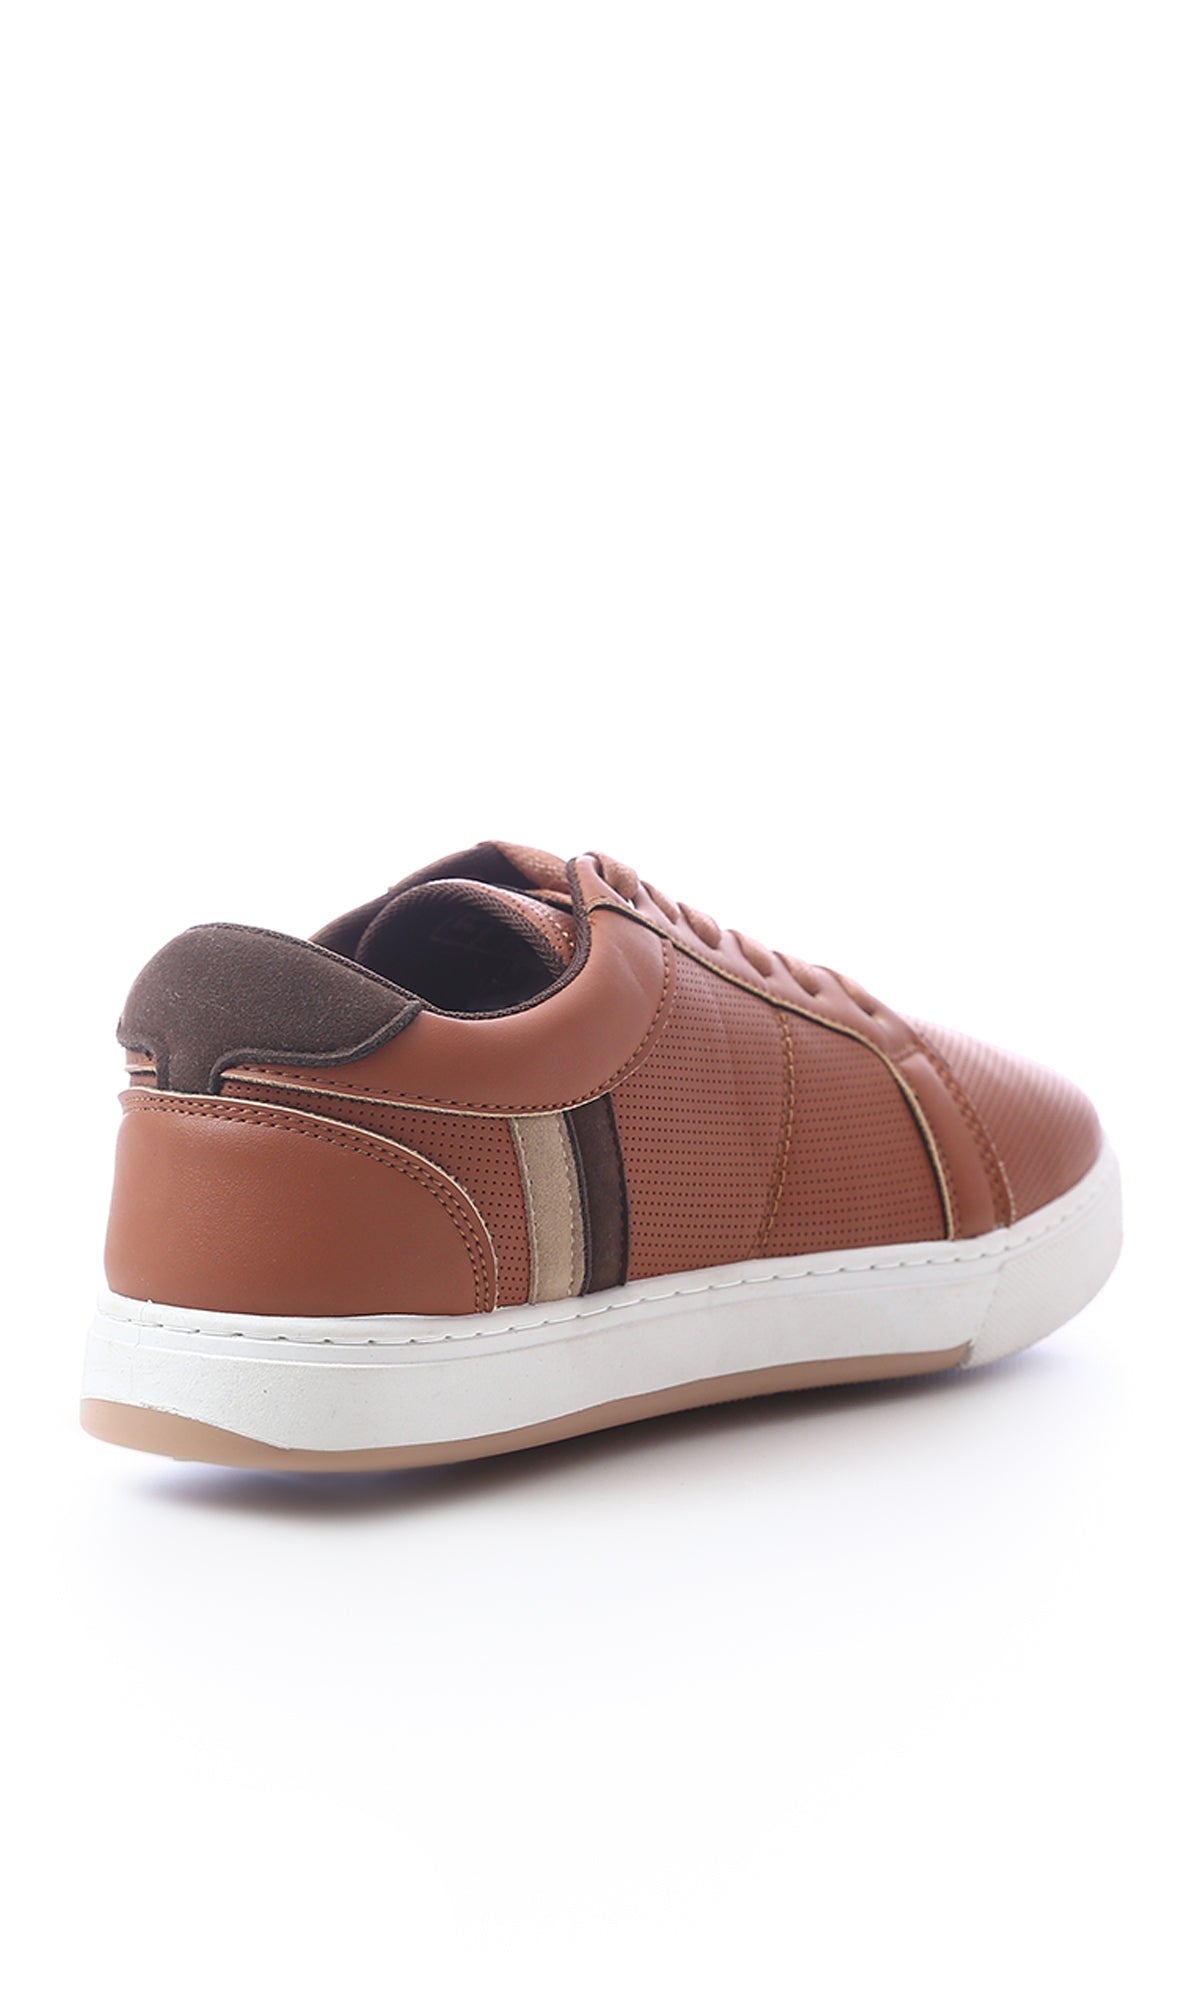 49907 Lace Up Round Toe Leather Dark Camel Casual Shoes